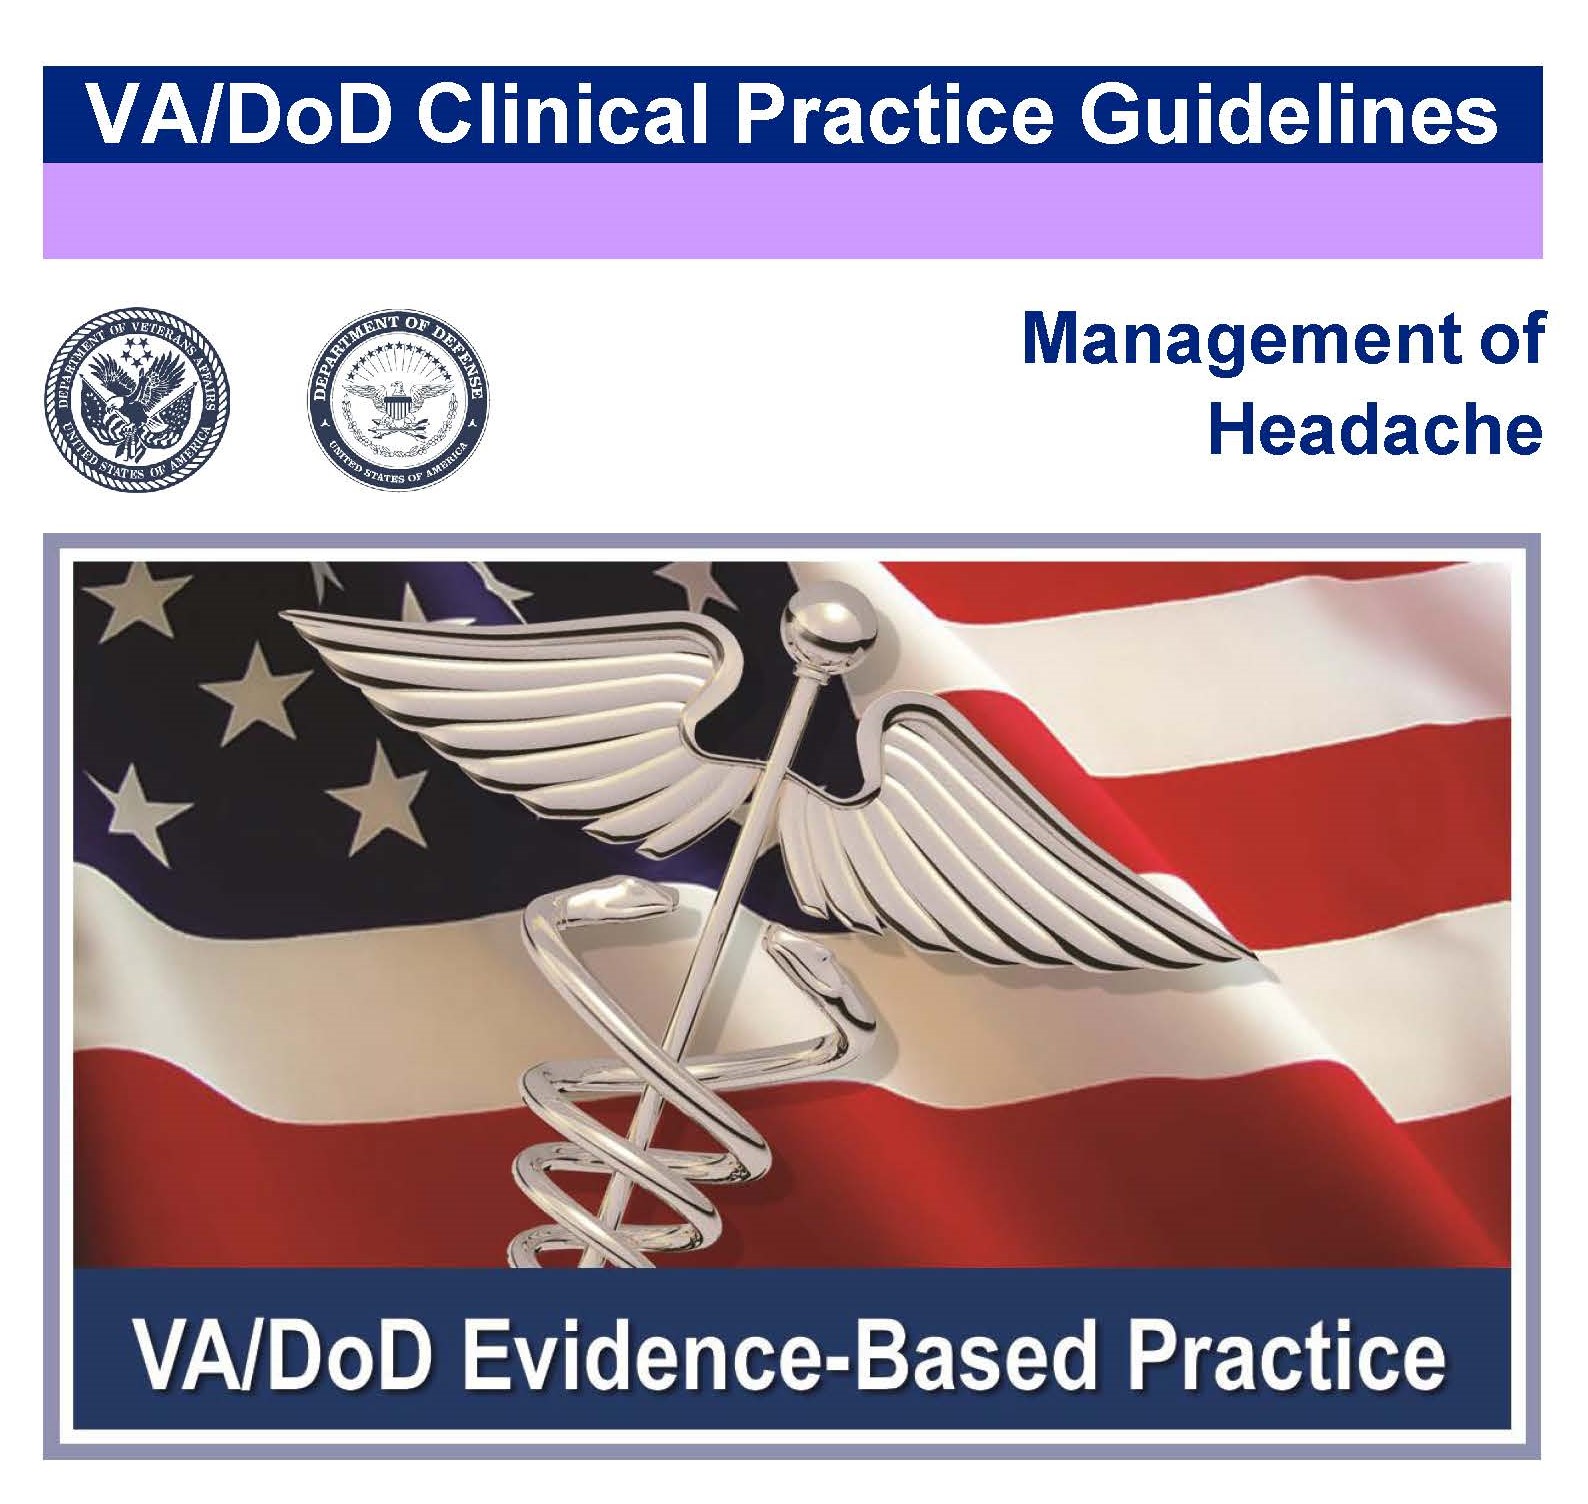 Image of the cover of the VA/DoD Clinical Practice Guideline Management of Management of Headache